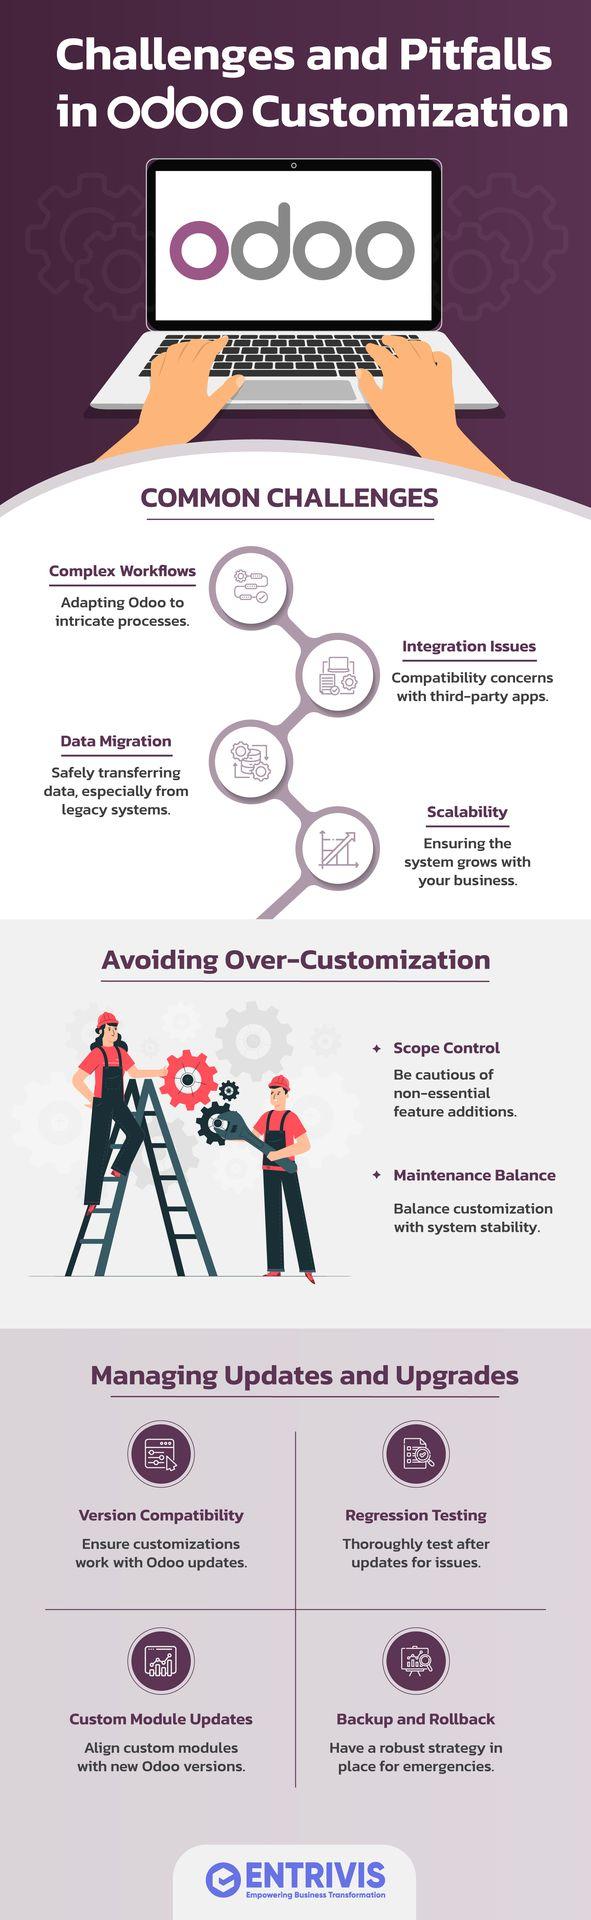 Challenges and Pitfalls in Odoo Customization